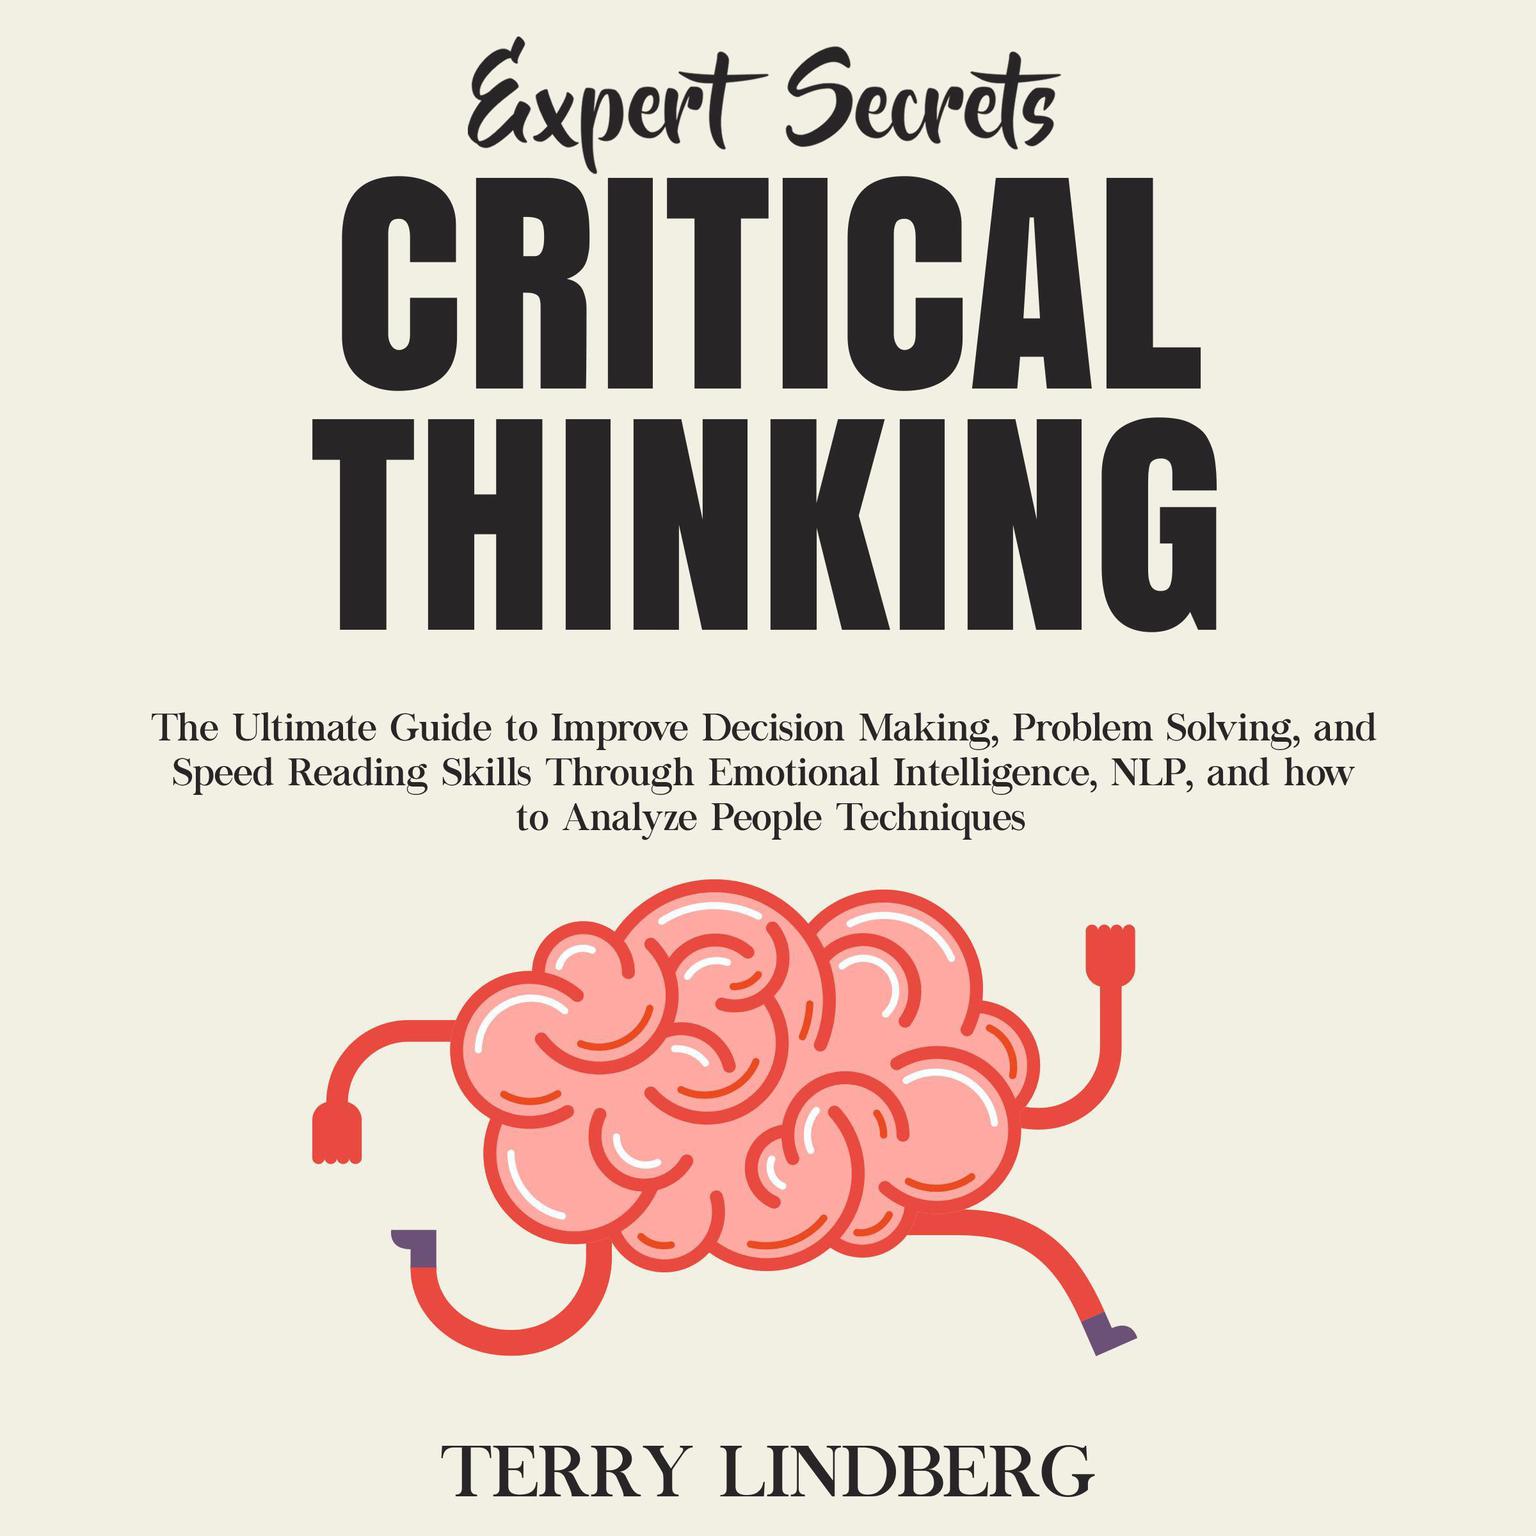 Expert Secrets – Critical Thinking: The Ultimate Guide to Improve Decision Making, Problem Solving, and Speed Reading Skills Through Emotional Intelligence, NLP, and how to Analyze People Techniques. Audiobook, by Terry Lindberg